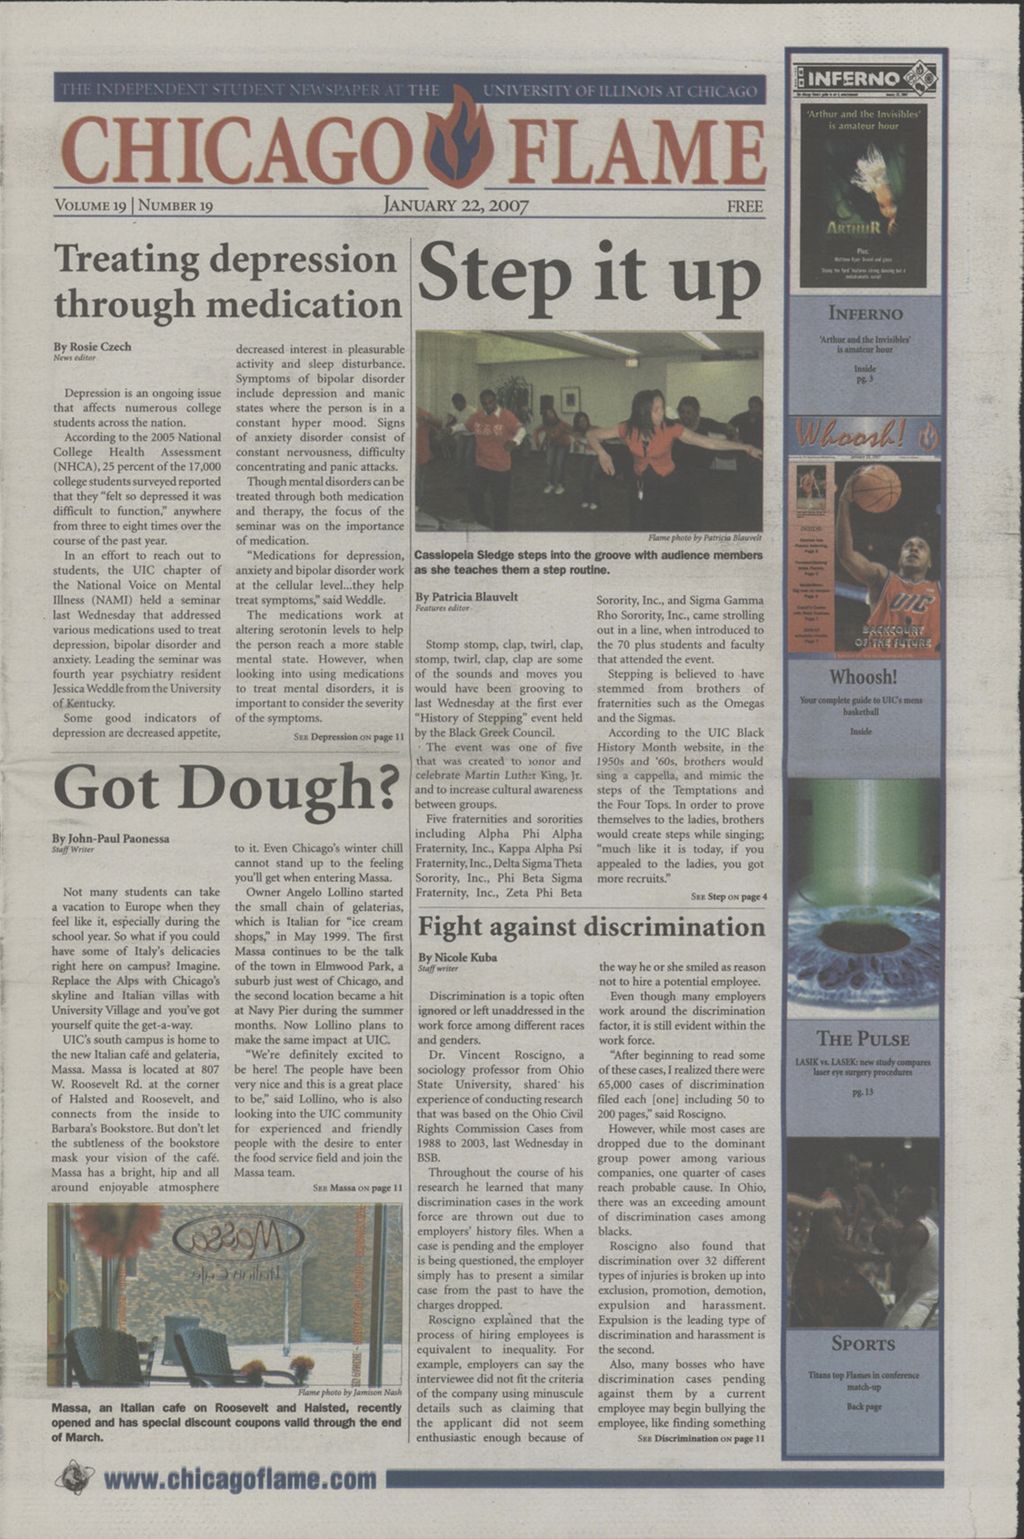 Chicago Flame (January 22, 2007)